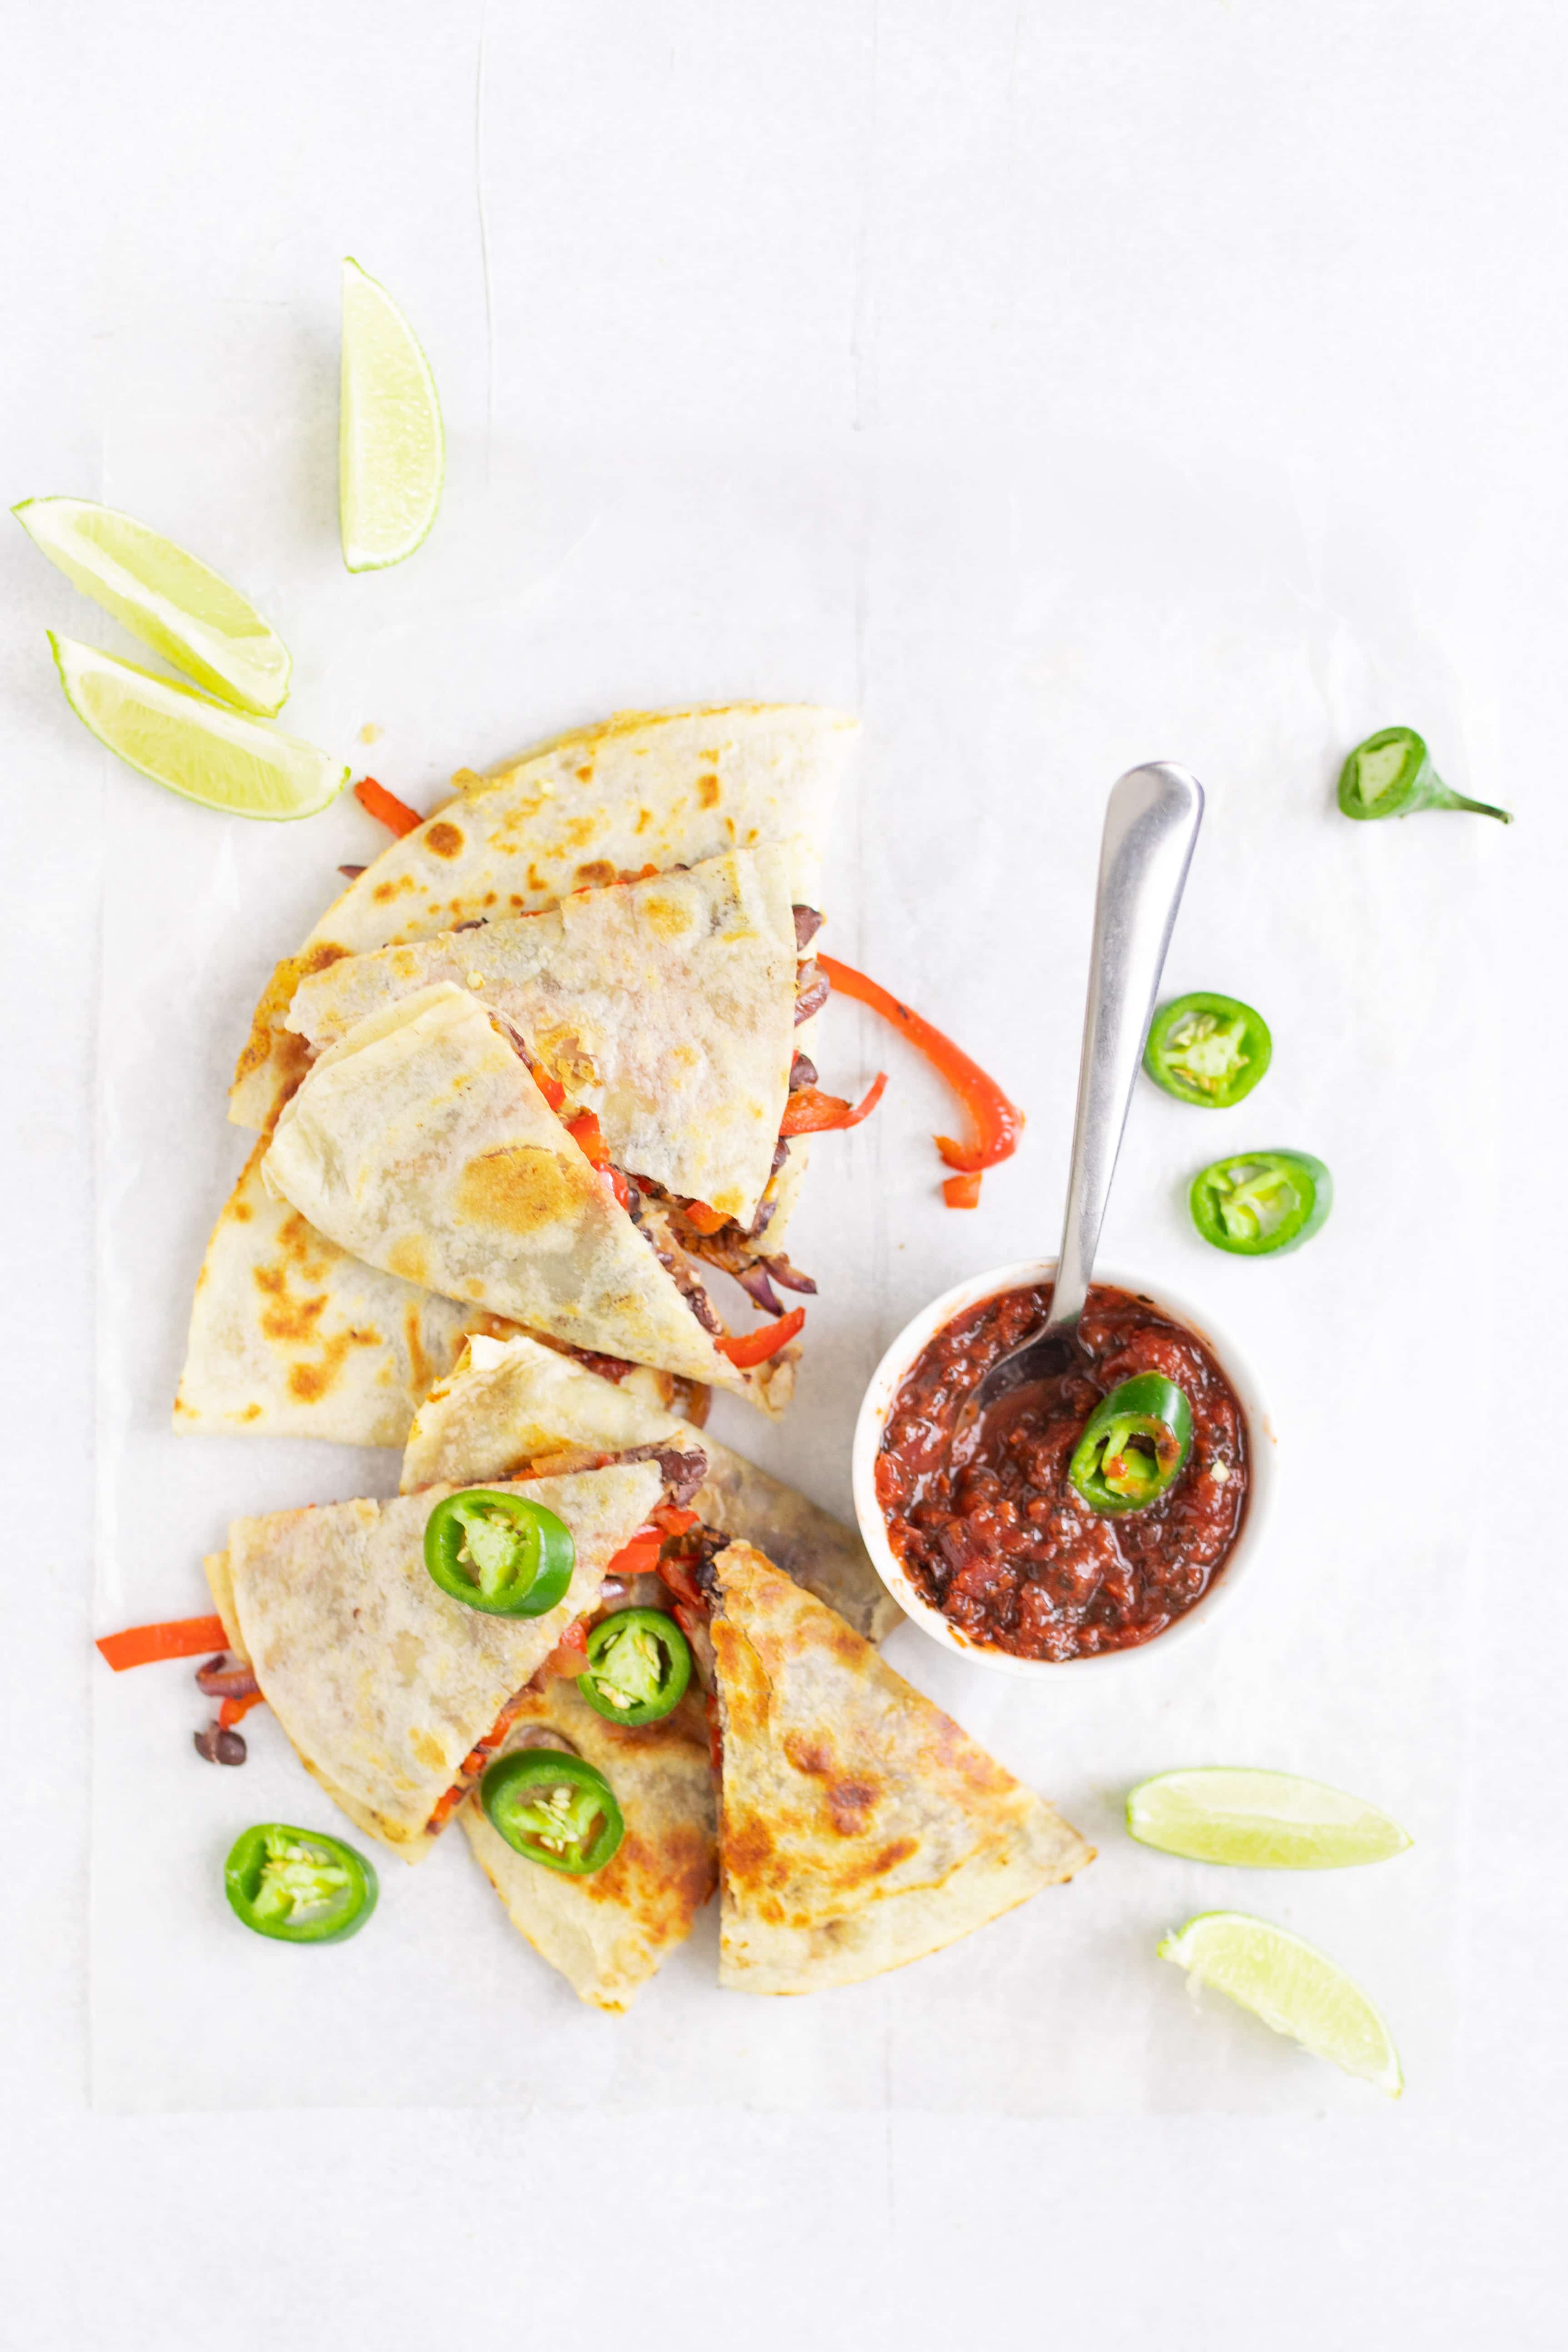 black bean & vegetable quesadilla on table with salsa and toppings